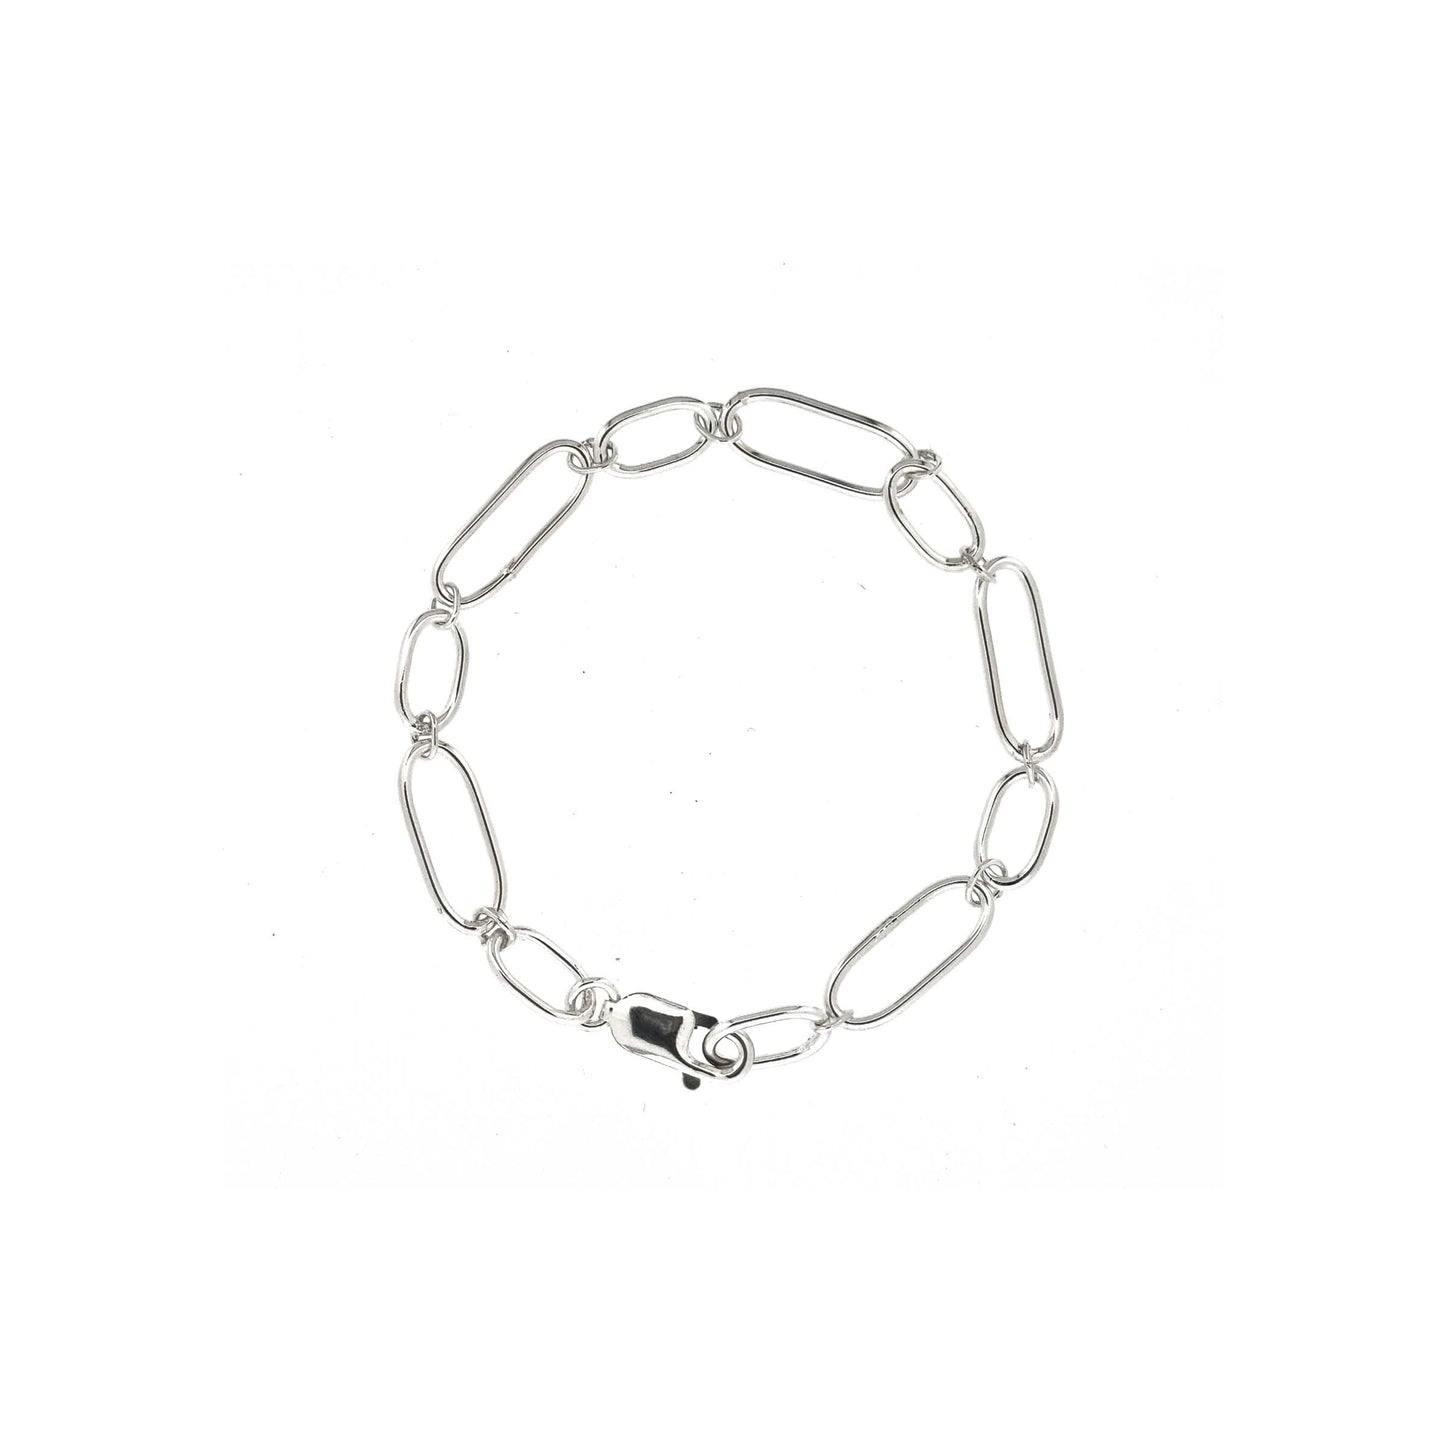 Silver chain bracelet with oblong links of different sizes.